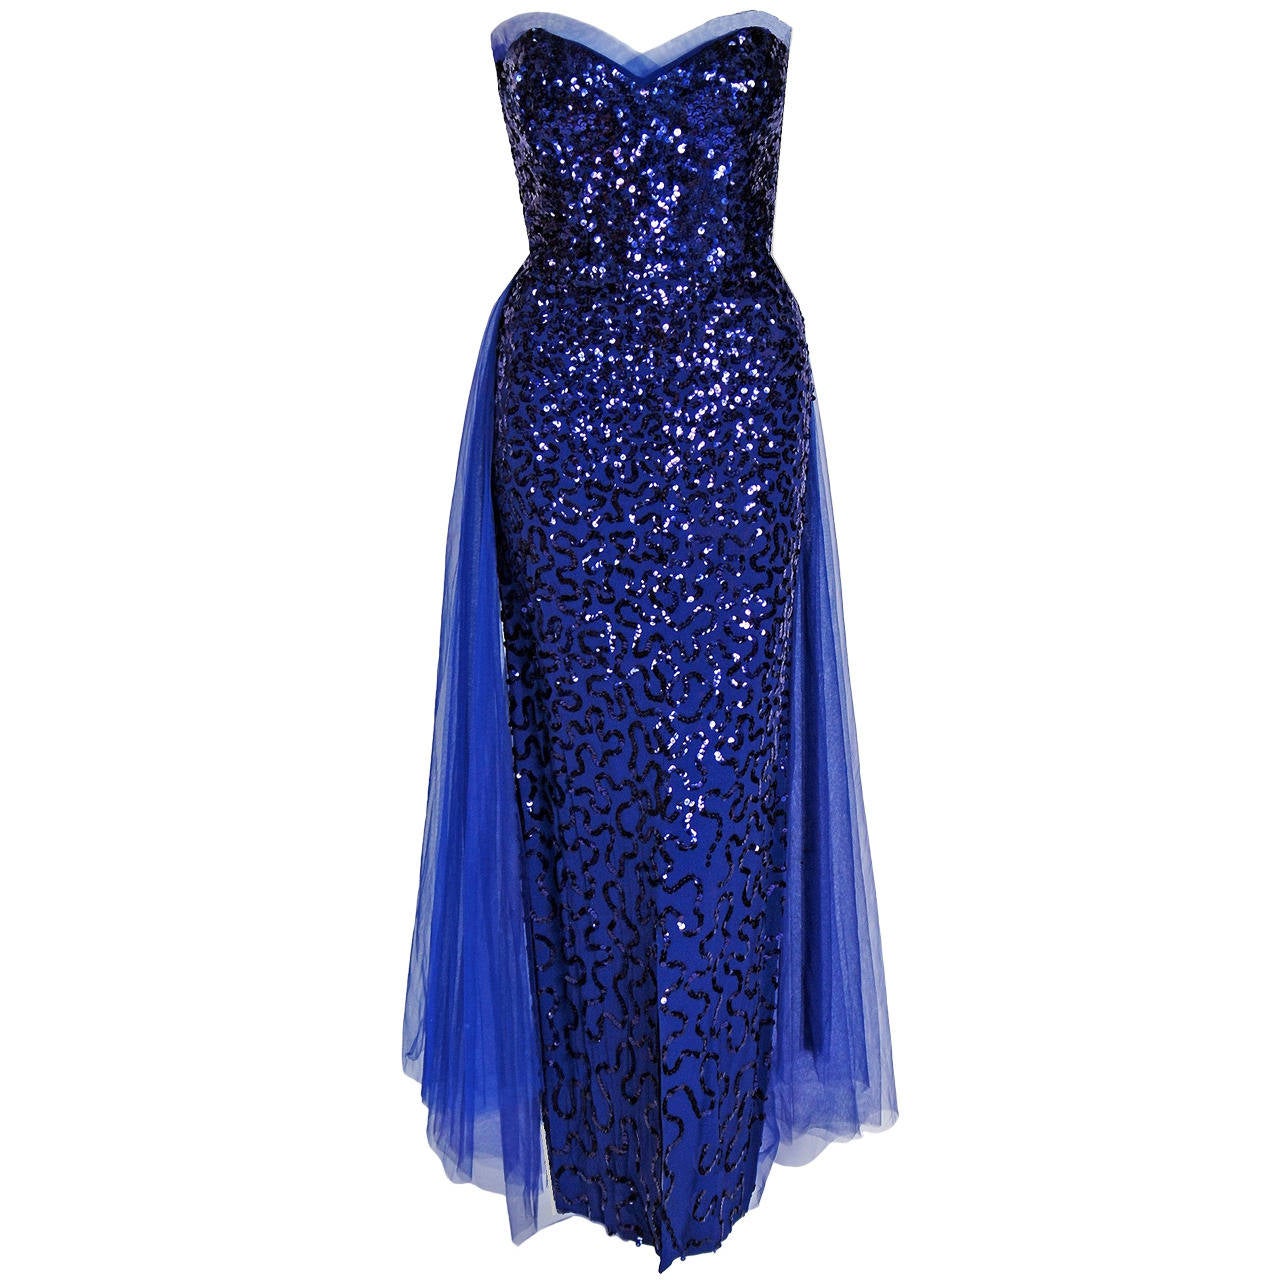 1950's Seductive Royal-Blue Sequin Rayon-Crepe Strapless Trained Evening Gown